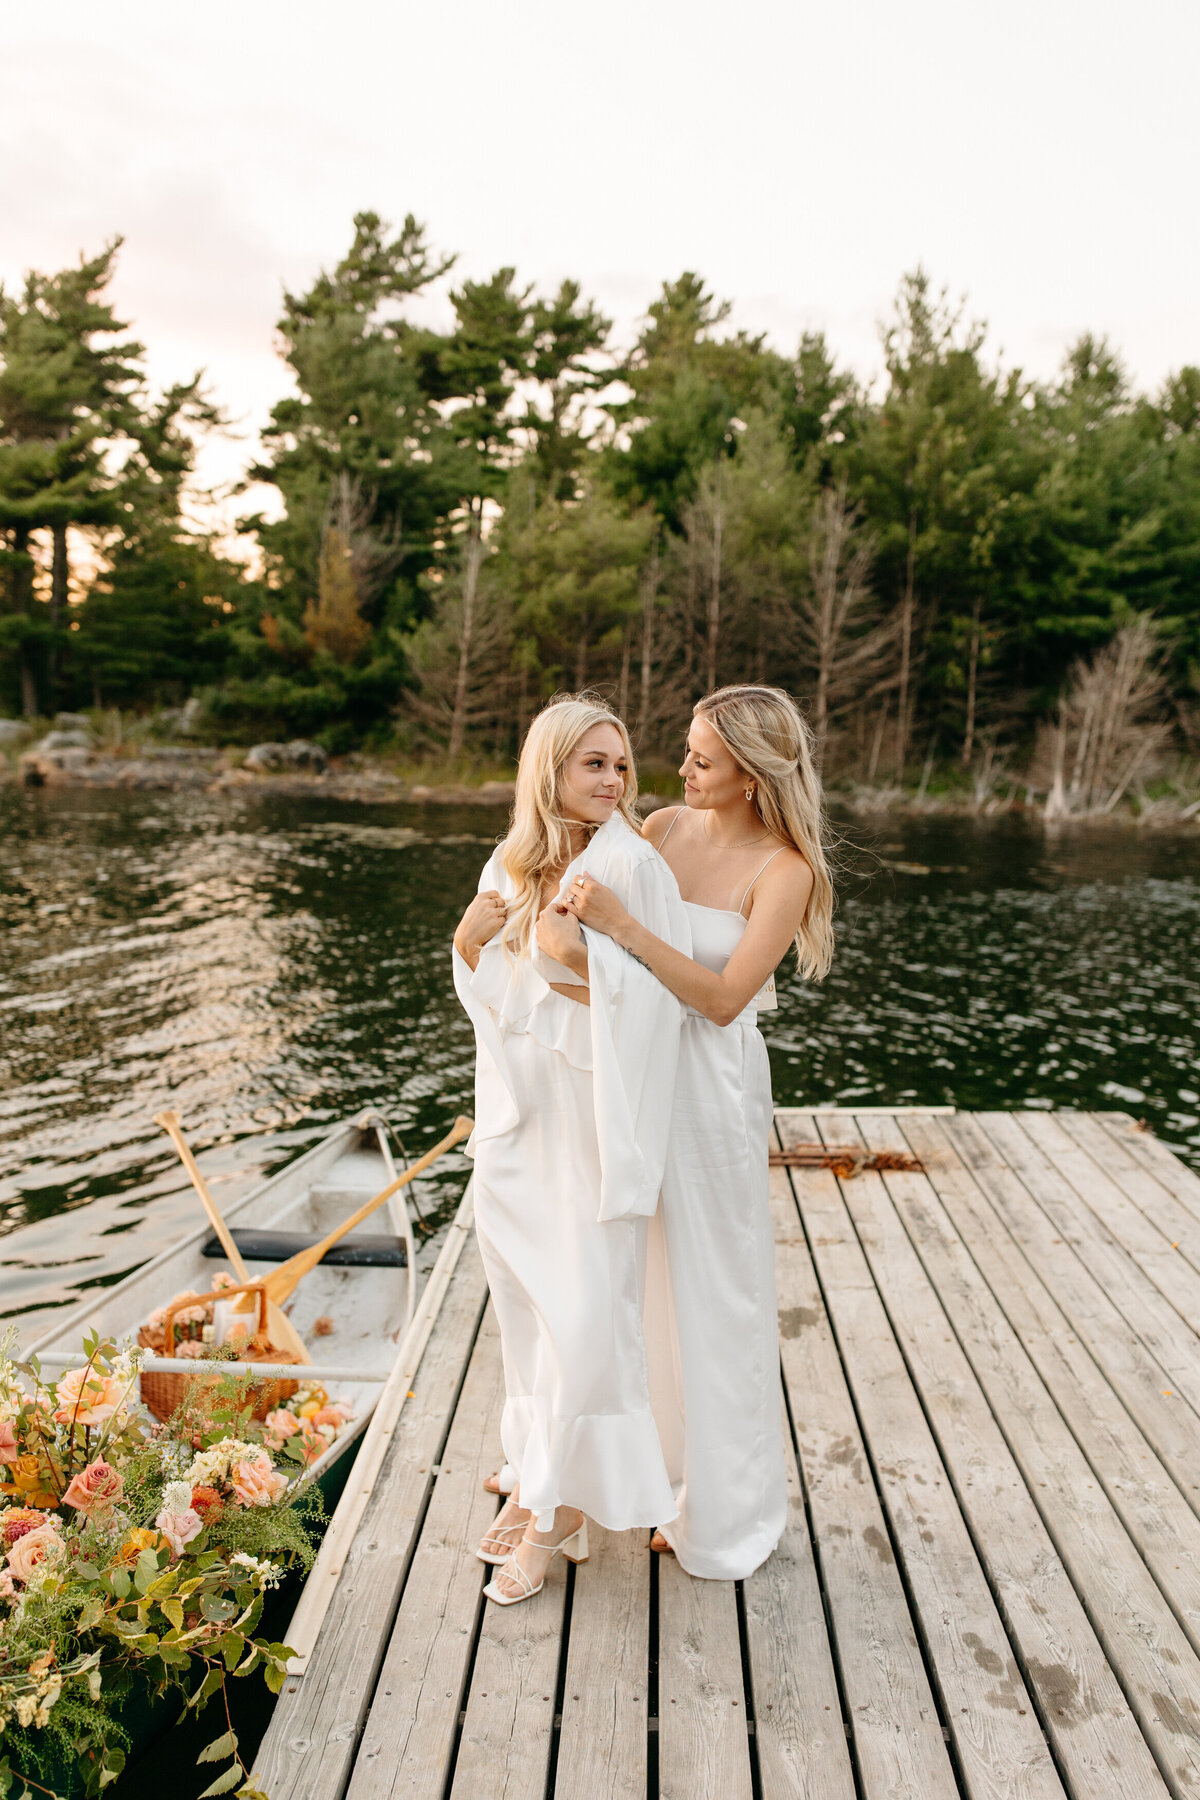 Two women in elegant white attire sharing a close embrace on a wooden dock over a tranquil lake surrounded by forest